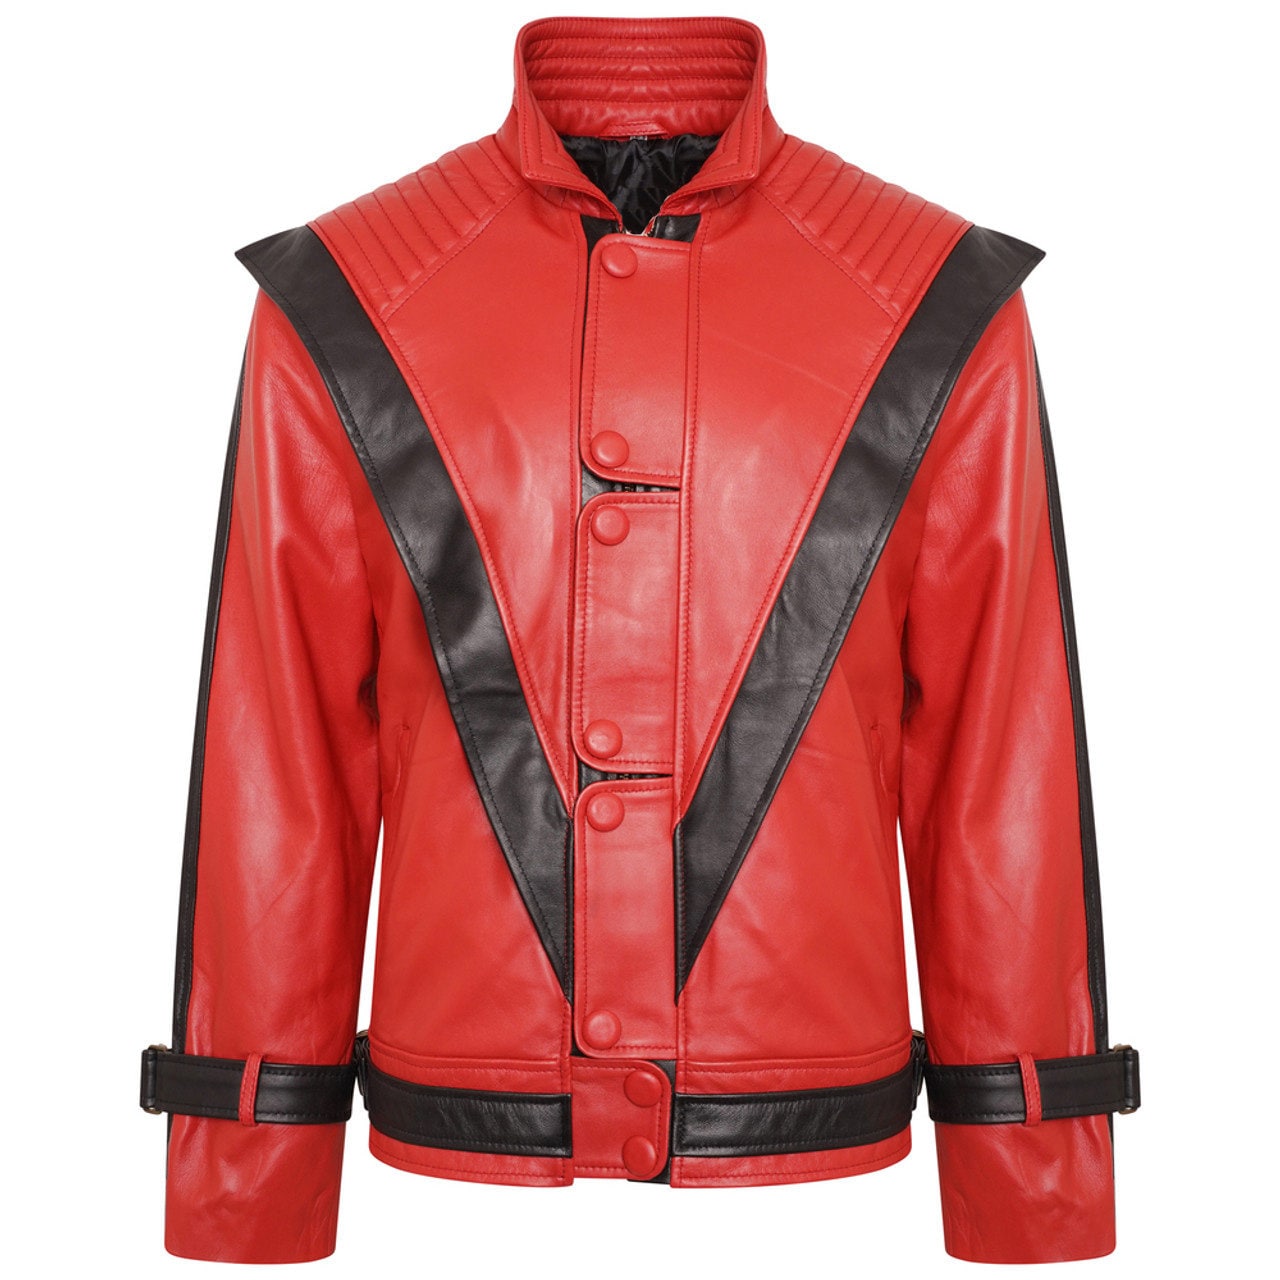 Details 81 The Thriller Jacket In Thdonghoadian